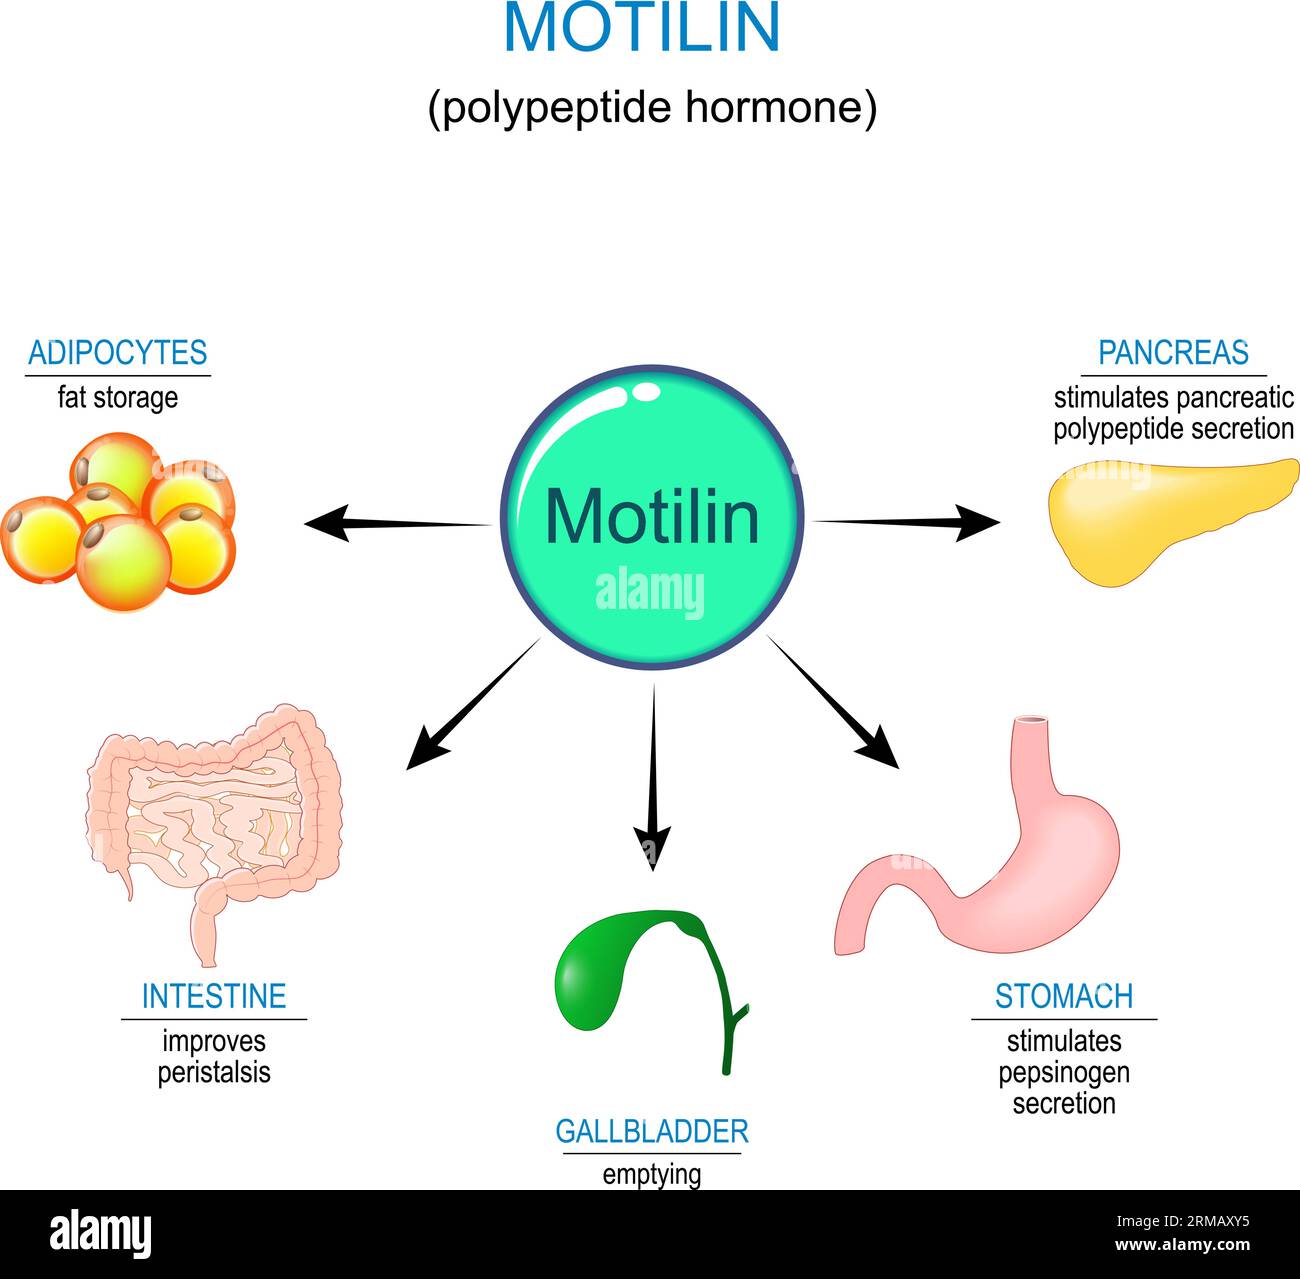 Motilin hormone and internal organs that reaction on polypeptide hormone. Gastrointestinal motility and Intestinal contractions. Migrating motor Stock Vector